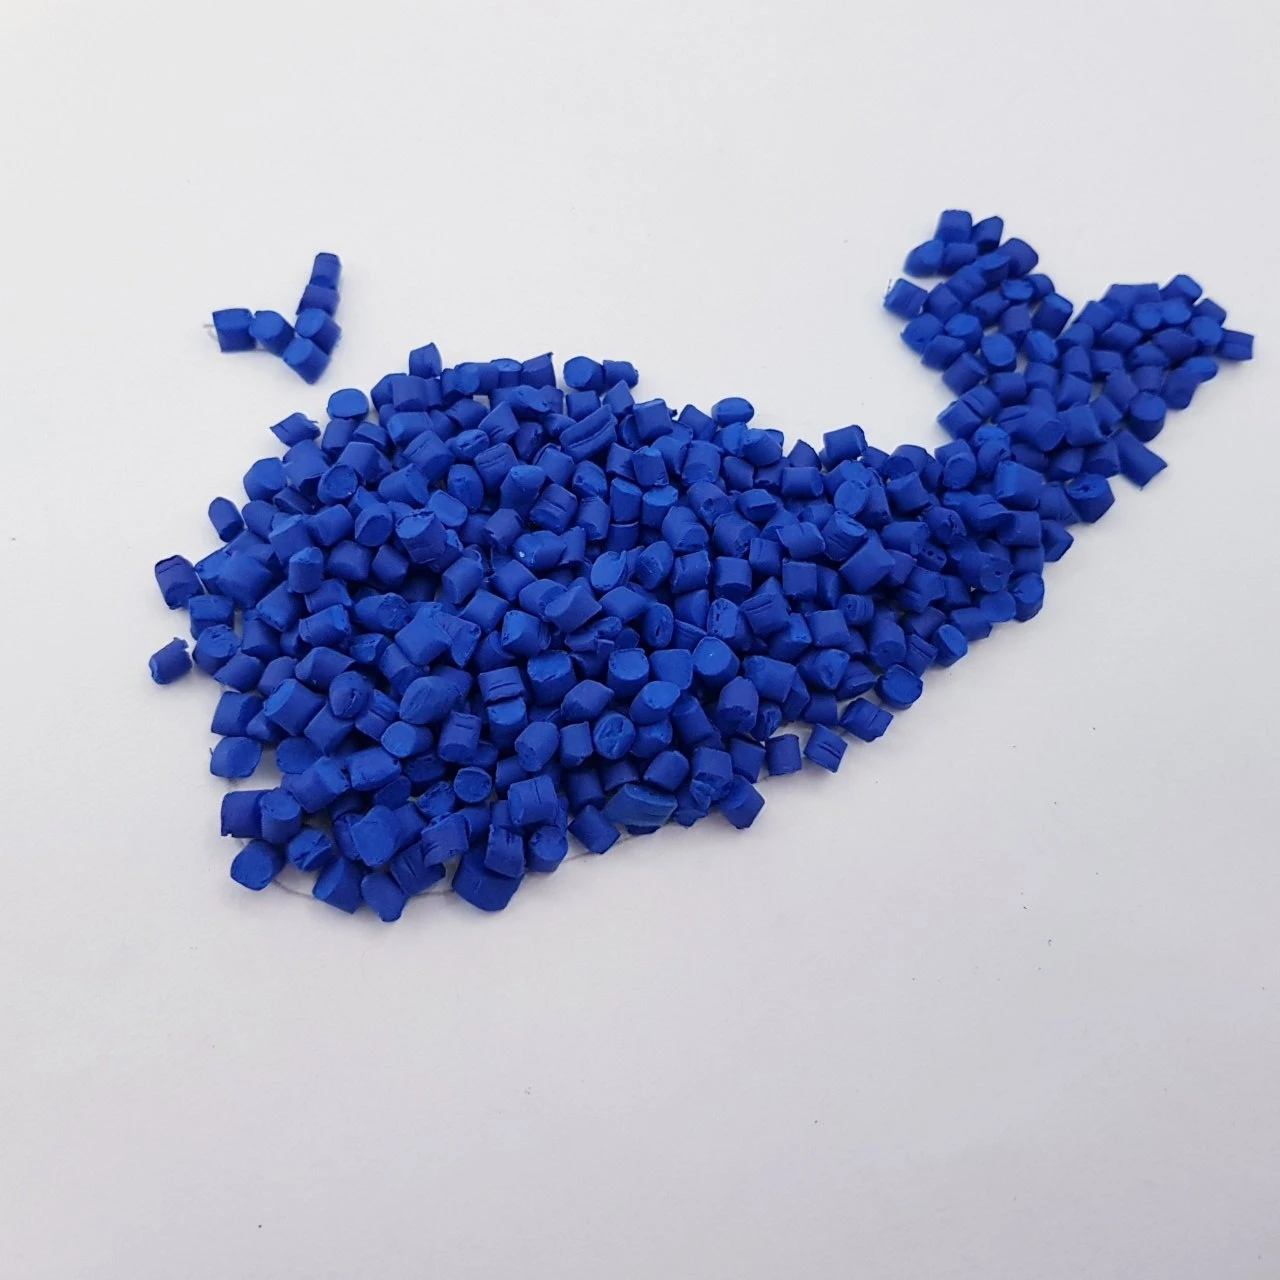 Blue Masterbatch for plastic shopping bag, injection applications (chair, plastic housewares products) with High quality pigment